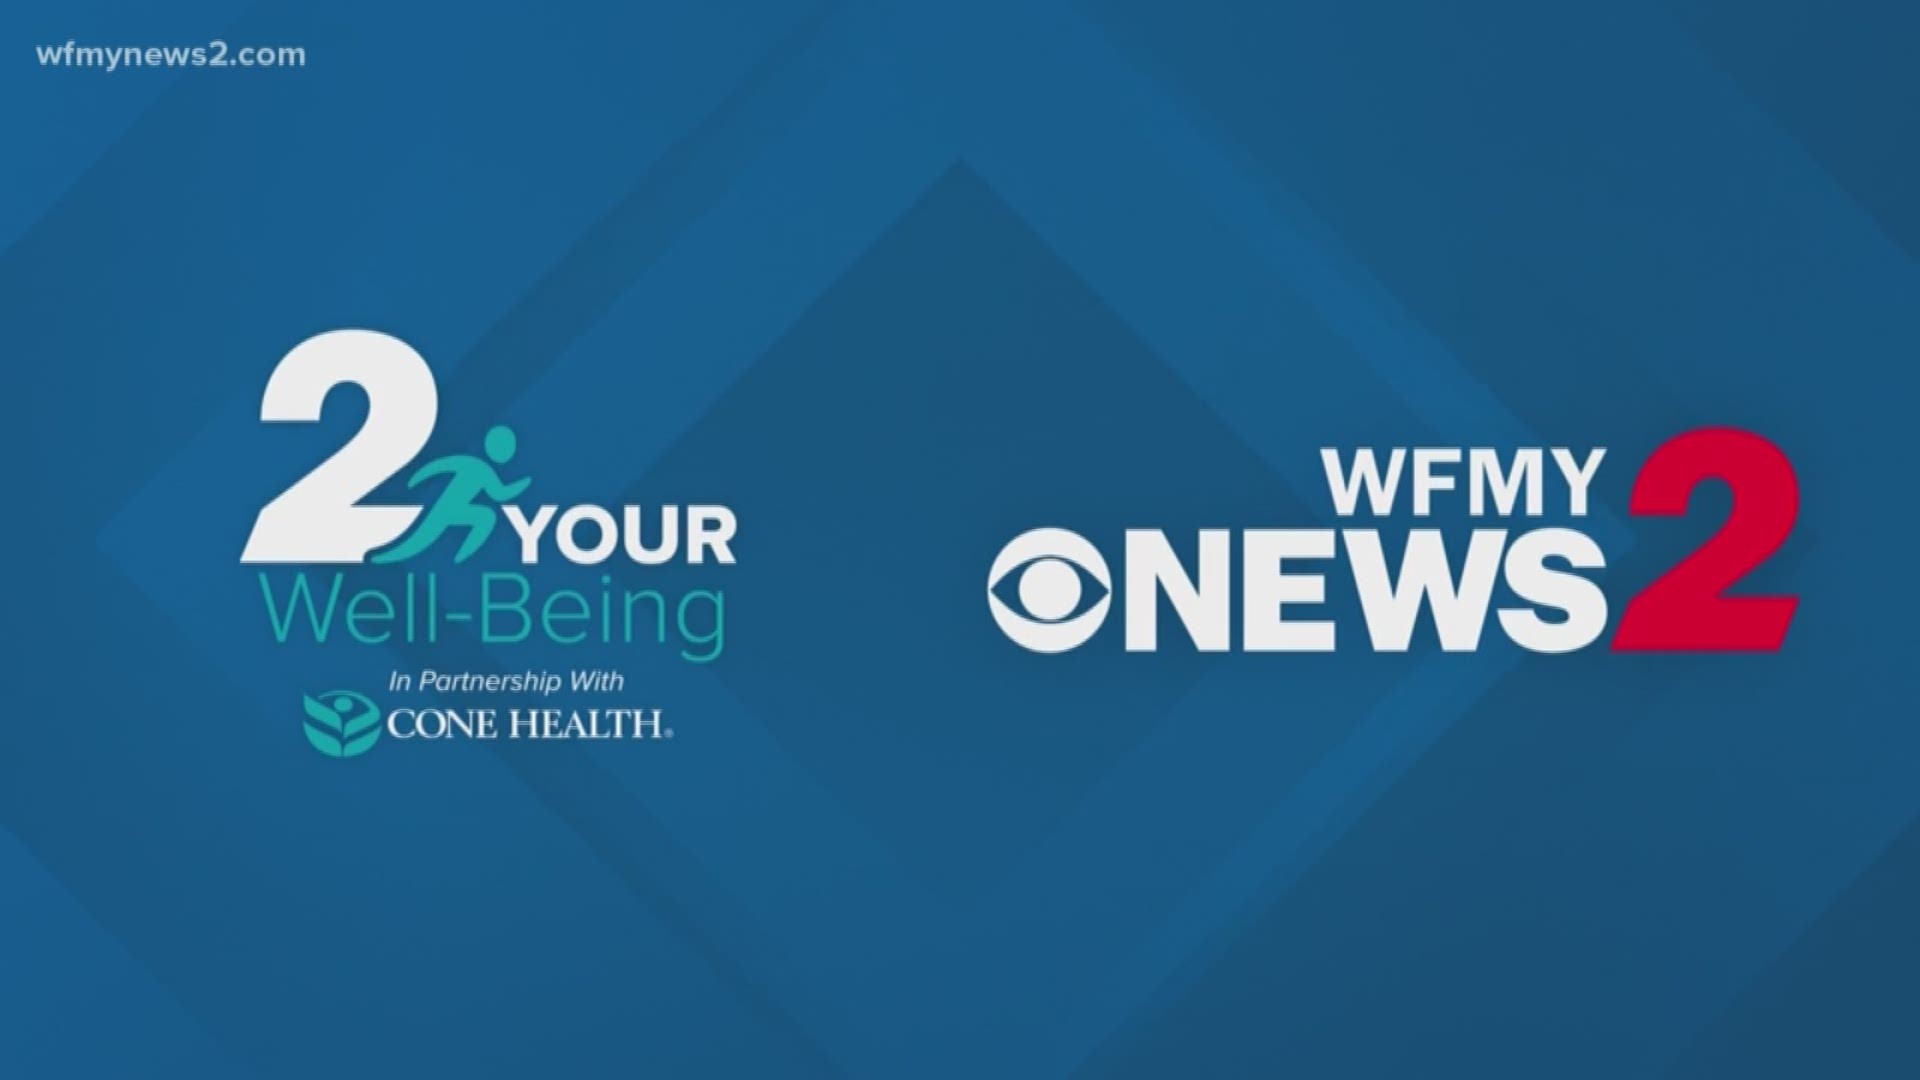 In this week's 2 Your Well-being segment, a closer look at how an app is flagging potential problems keeping mom and baby safe.